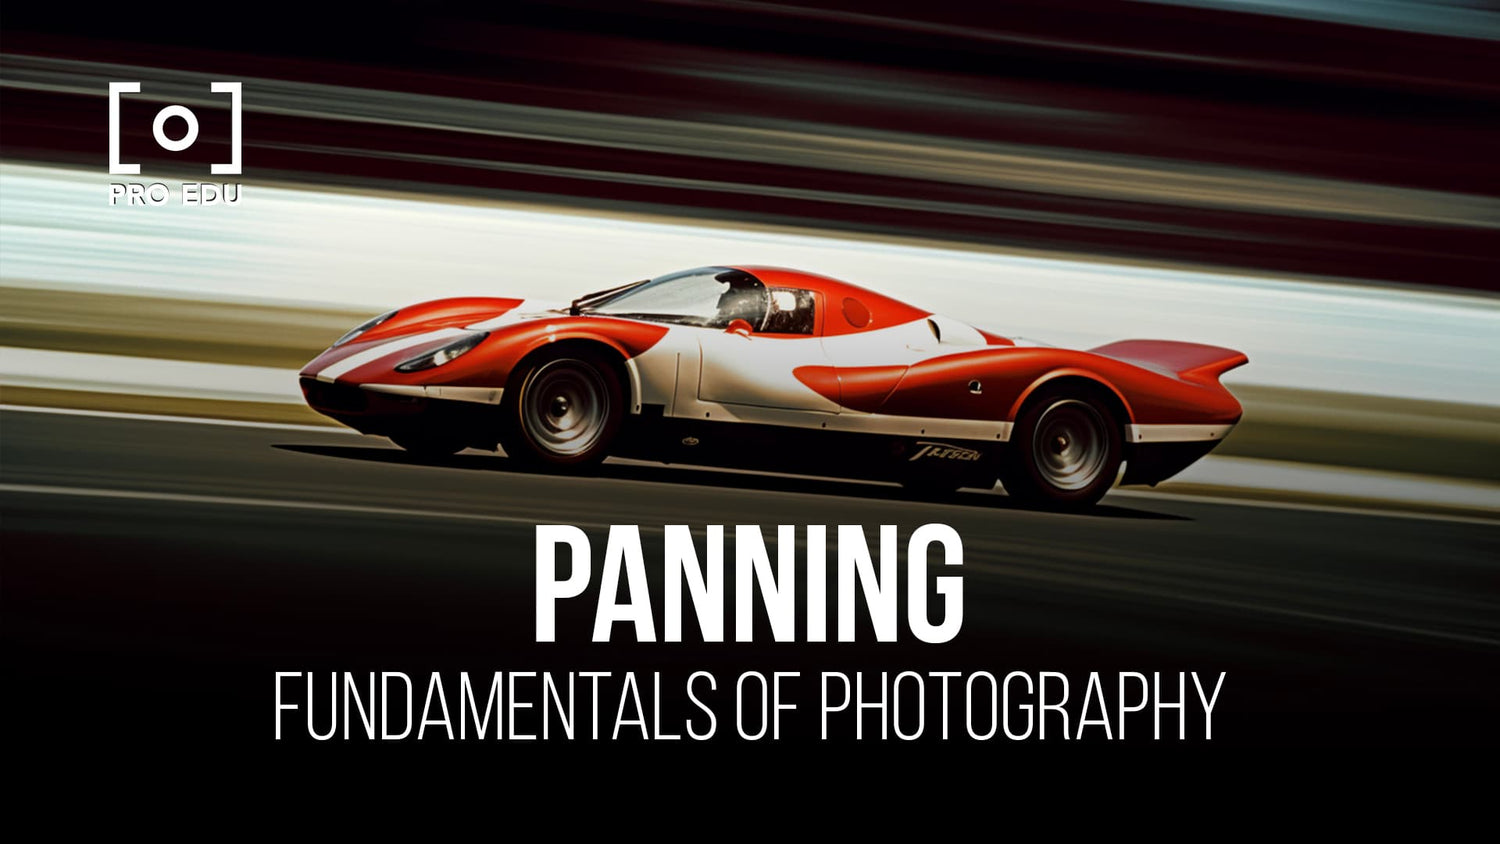 Capturing speed with elegance using panning photography techniques